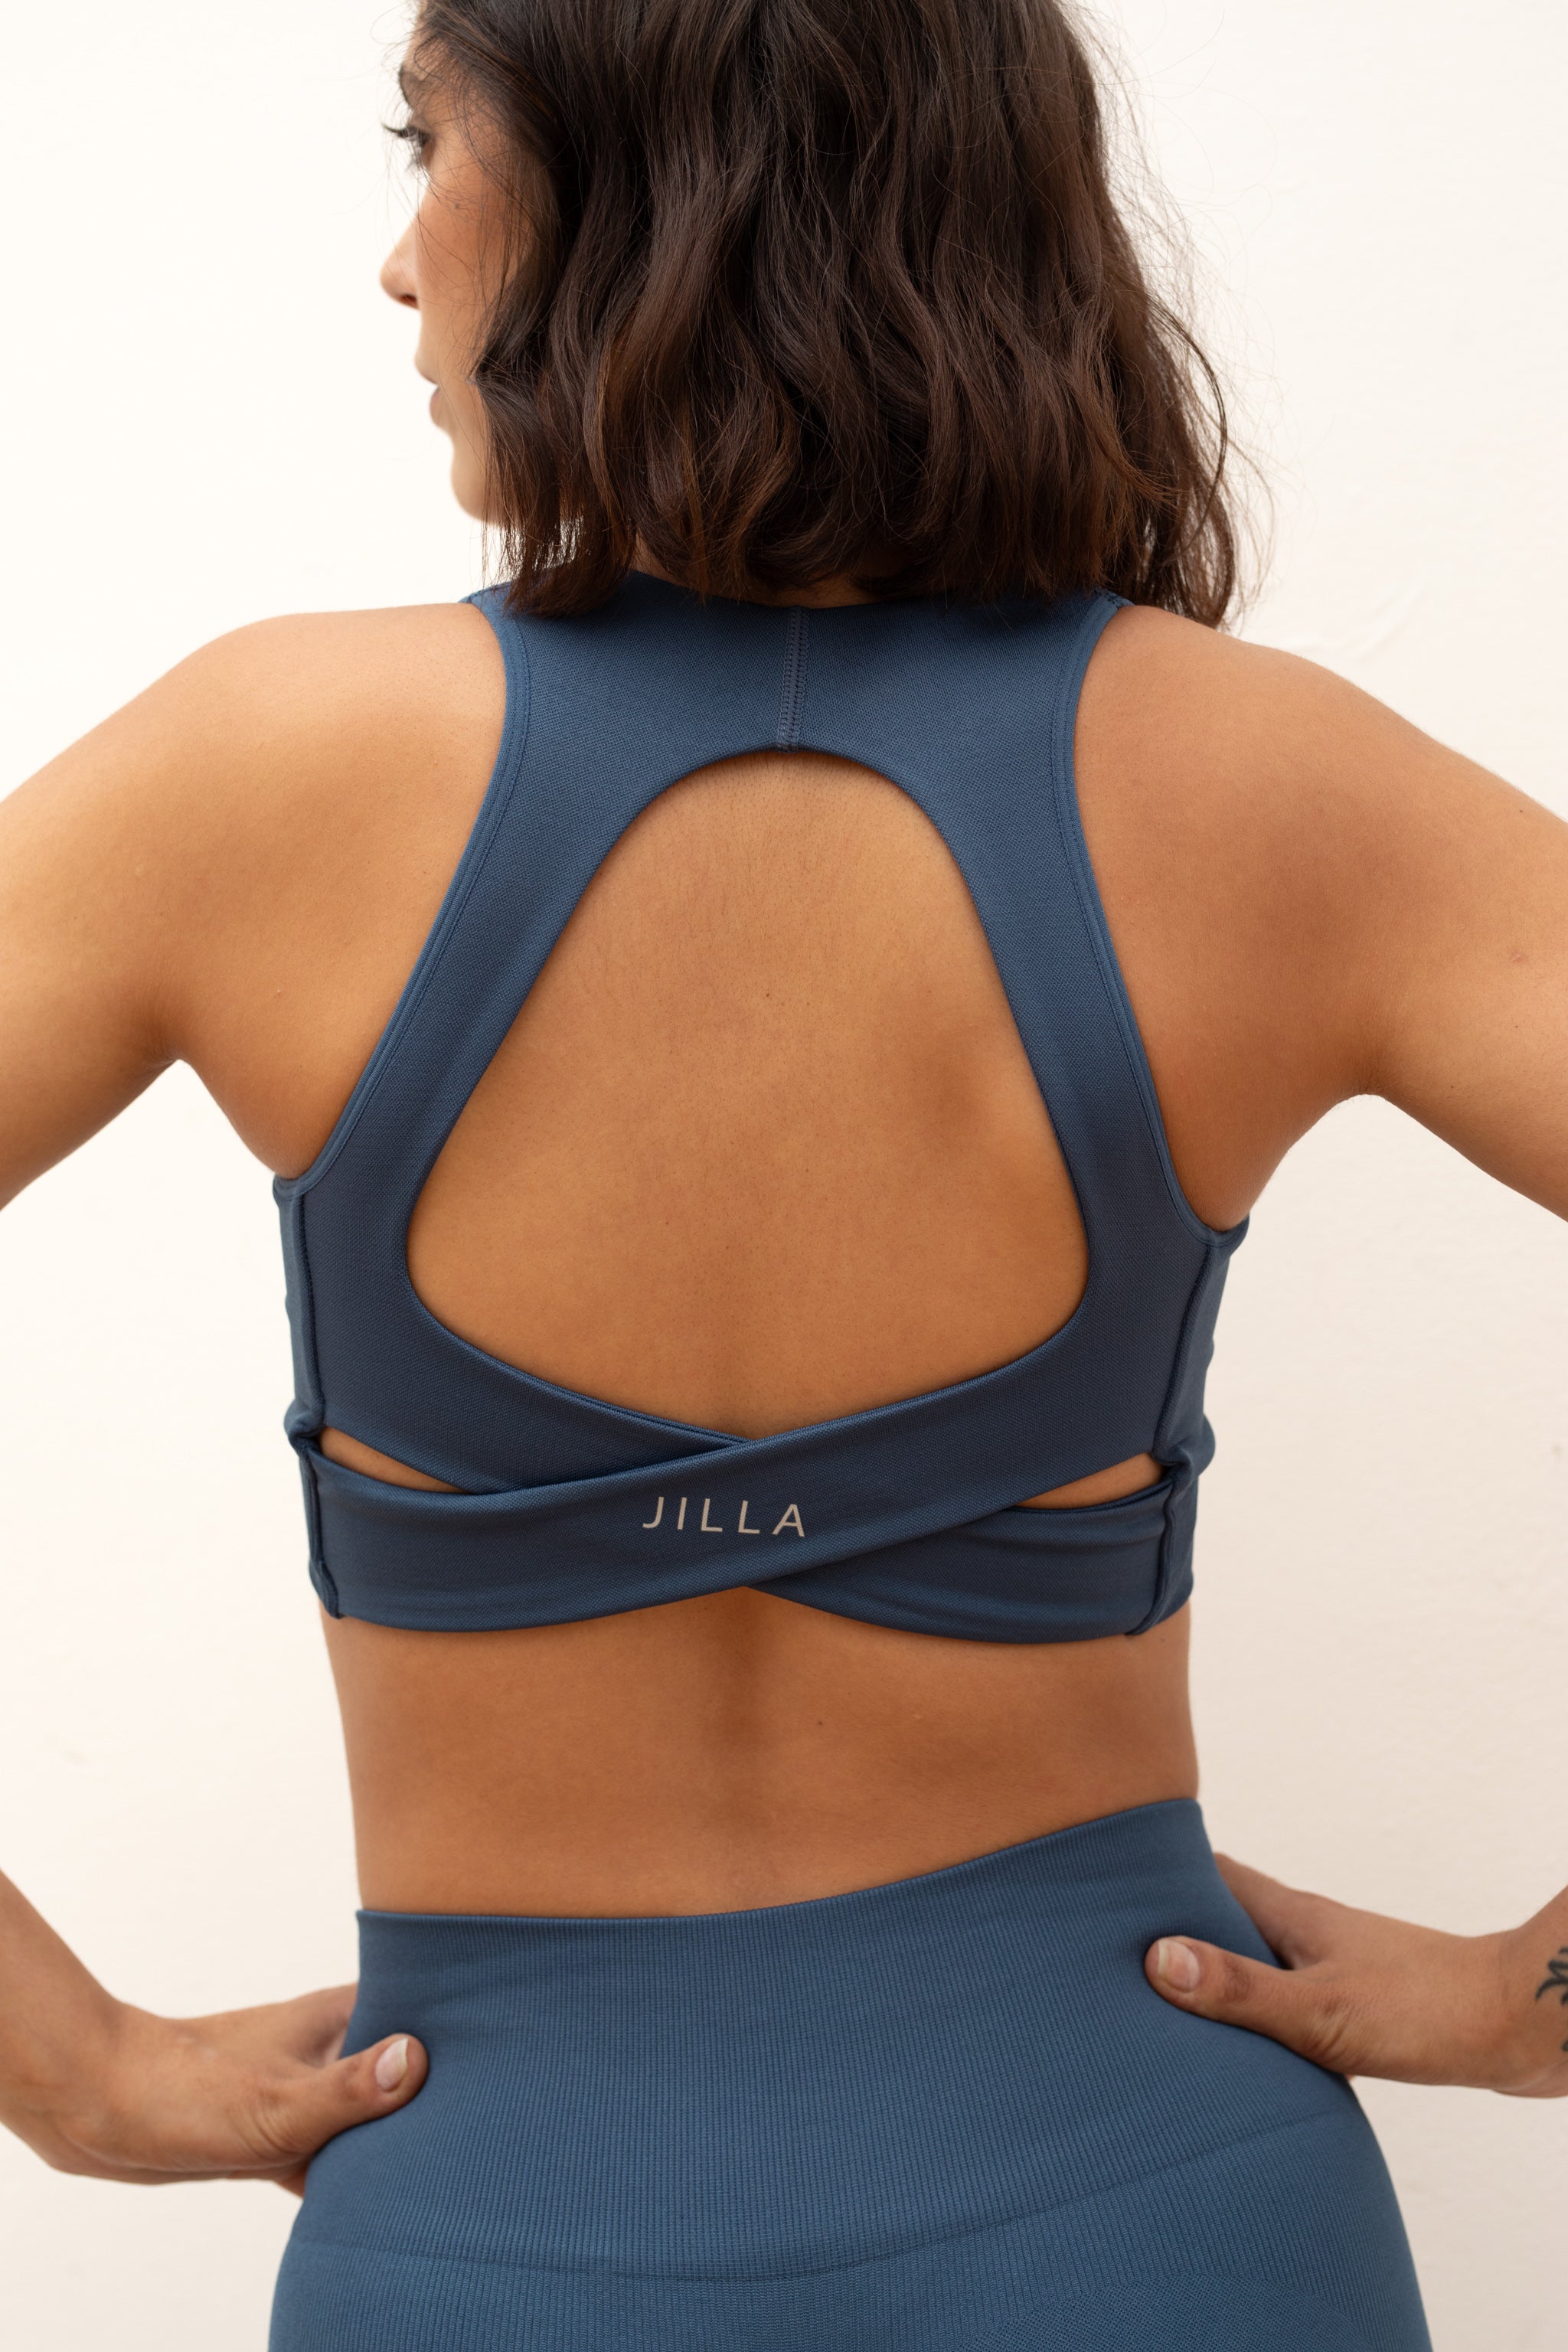 Blue V neck recycled supportive sports bra and leggings from sustainable women's activewear brand Jilla